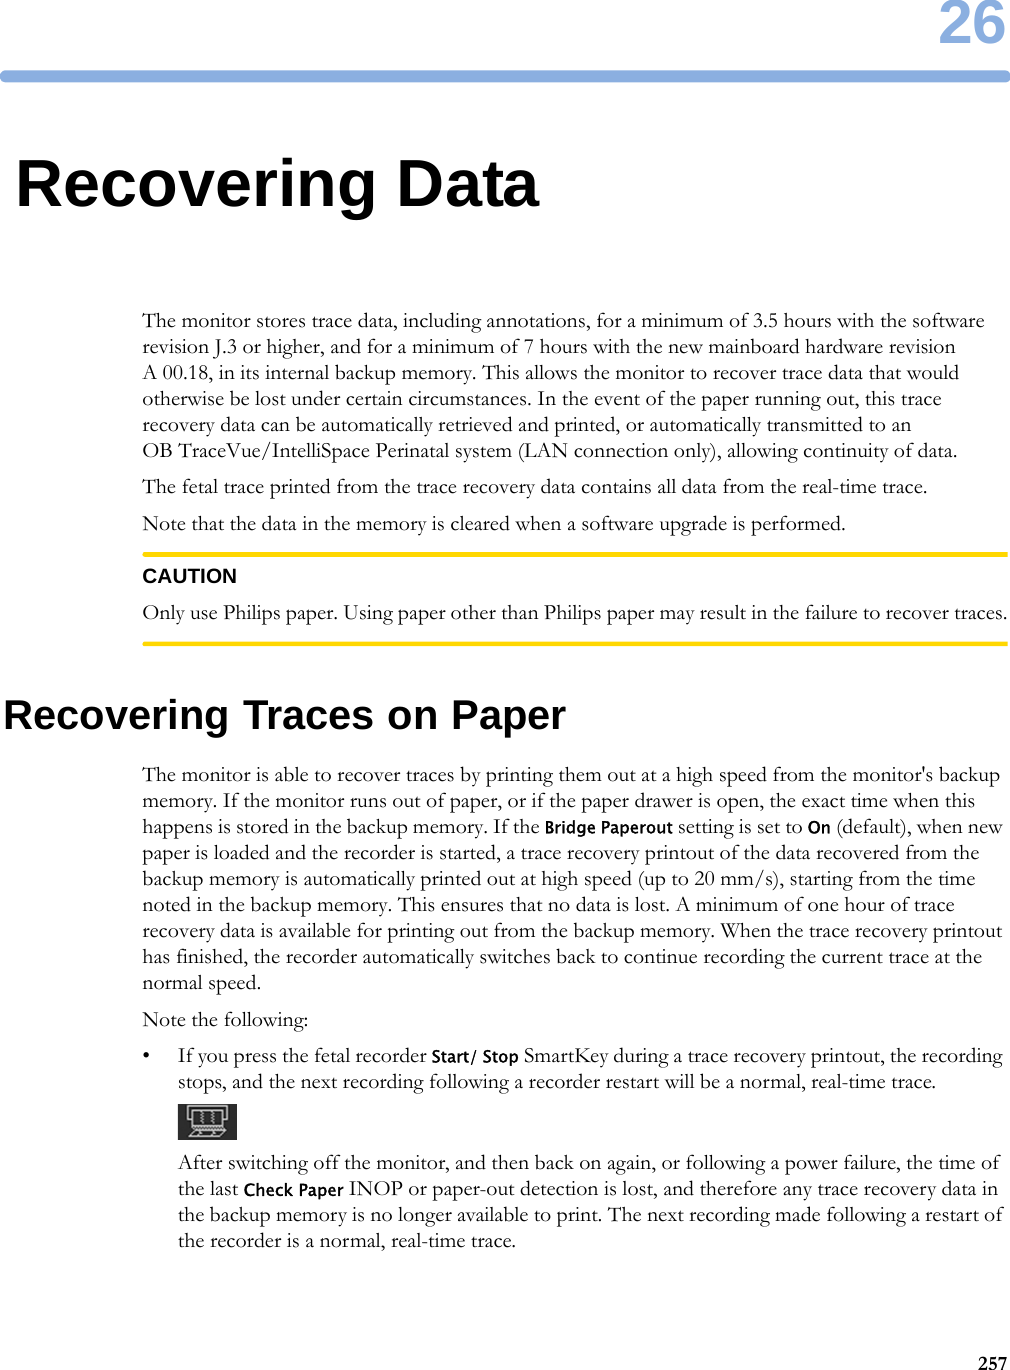 2625726Recovering DataThe monitor stores trace data, including annotations, for a minimum of 3.5 hours with the software revision J.3 or higher, and for a minimum of 7 hours with the new mainboard hardware revision A 00.18, in its internal backup memory. This allows the monitor to recover trace data that would otherwise be lost under certain circumstances. In the event of the paper running out, this trace recovery data can be automatically retrieved and printed, or automatically transmitted to an OB TraceVue/IntelliSpace Perinatal system (LAN connection only), allowing continuity of data.The fetal trace printed from the trace recovery data contains all data from the real-time trace.Note that the data in the memory is cleared when a software upgrade is performed.CAUTIONOnly use Philips paper. Using paper other than Philips paper may result in the failure to recover traces.Recovering Traces on PaperThe monitor is able to recover traces by printing them out at a high speed from the monitor&apos;s backup memory. If the monitor runs out of paper, or if the paper drawer is open, the exact time when this happens is stored in the backup memory. If the Bridge Paperout setting is set to On (default), when new paper is loaded and the recorder is started, a trace recovery printout of the data recovered from the backup memory is automatically printed out at high speed (up to 20 mm/s), starting from the time noted in the backup memory. This ensures that no data is lost. A minimum of one hour of trace recovery data is available for printing out from the backup memory. When the trace recovery printout has finished, the recorder automatically switches back to continue recording the current trace at the normal speed.Note the following:• If you press the fetal recorder Start/ Stop SmartKey during a trace recovery printout, the recording stops, and the next recording following a recorder restart will be a normal, real-time trace.After switching off the monitor, and then back on again, or following a power failure, the time of the last Check Paper INOP or paper-out detection is lost, and therefore any trace recovery data in the backup memory is no longer available to print. The next recording made following a restart of the recorder is a normal, real-time trace.